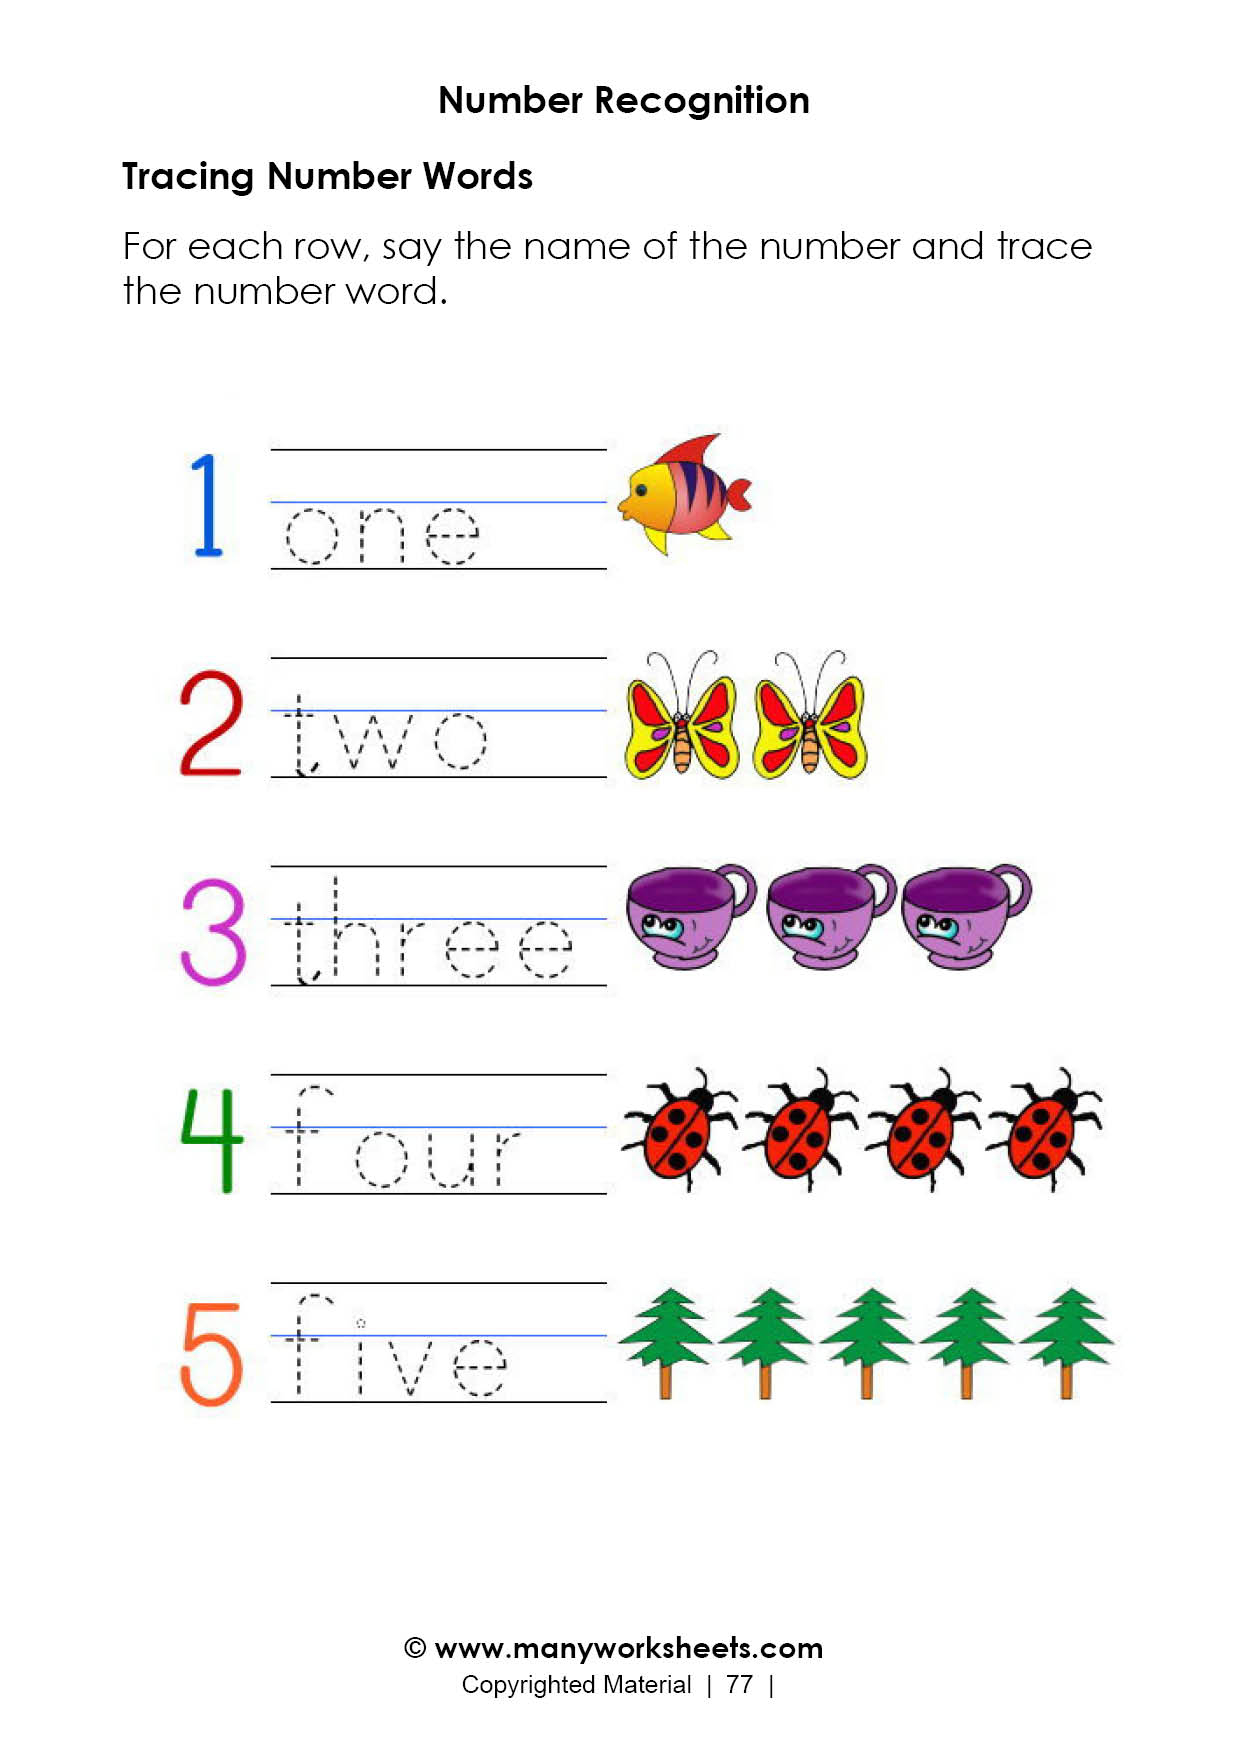 Number-Recognition-1